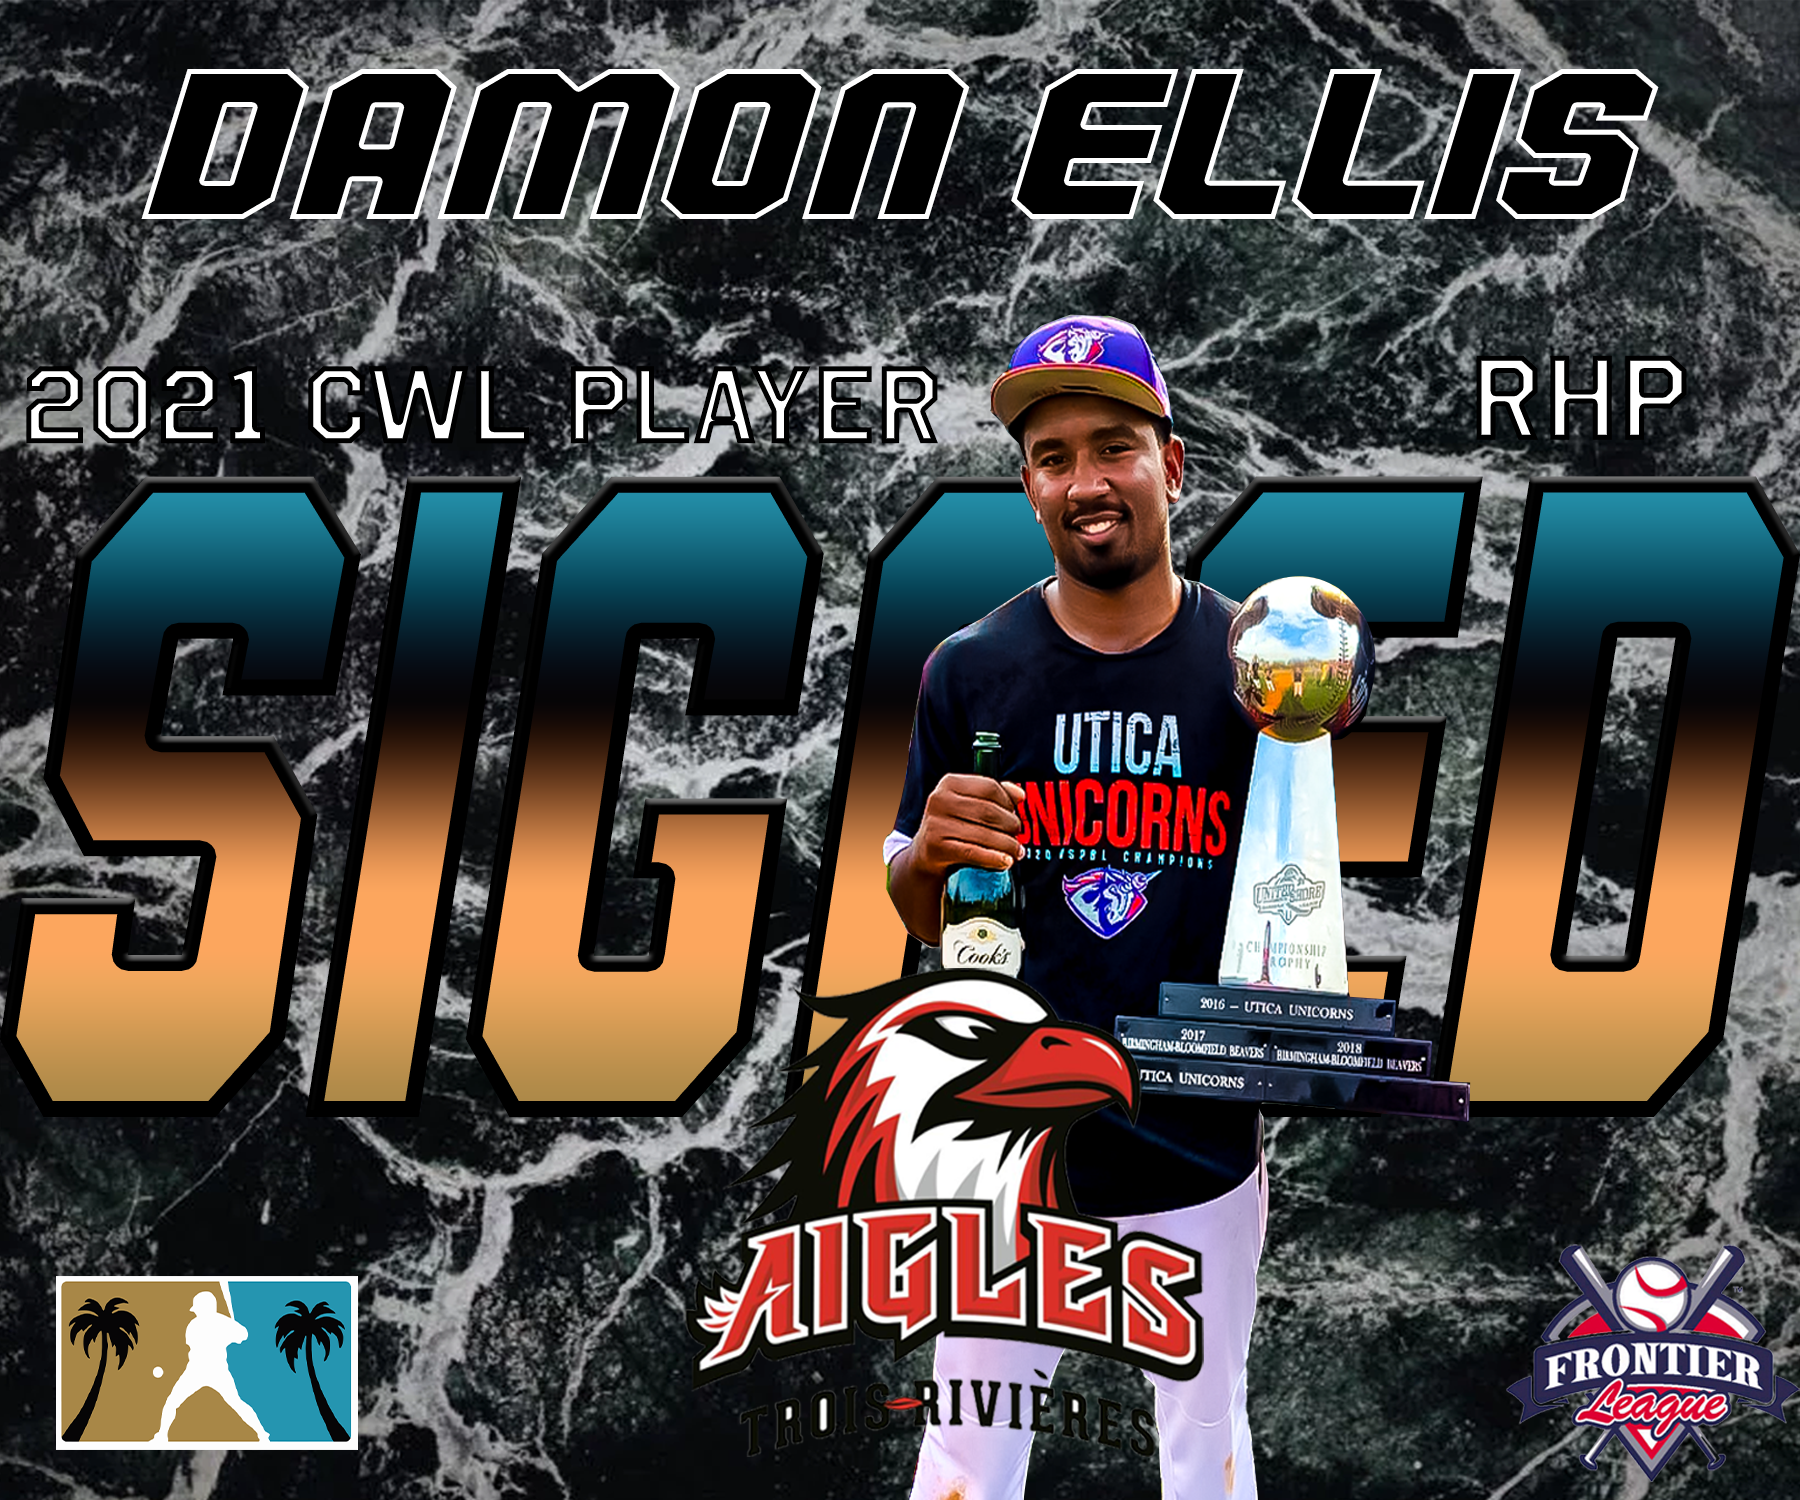 2021 RHP Ellis Signed by Trois Rivieres